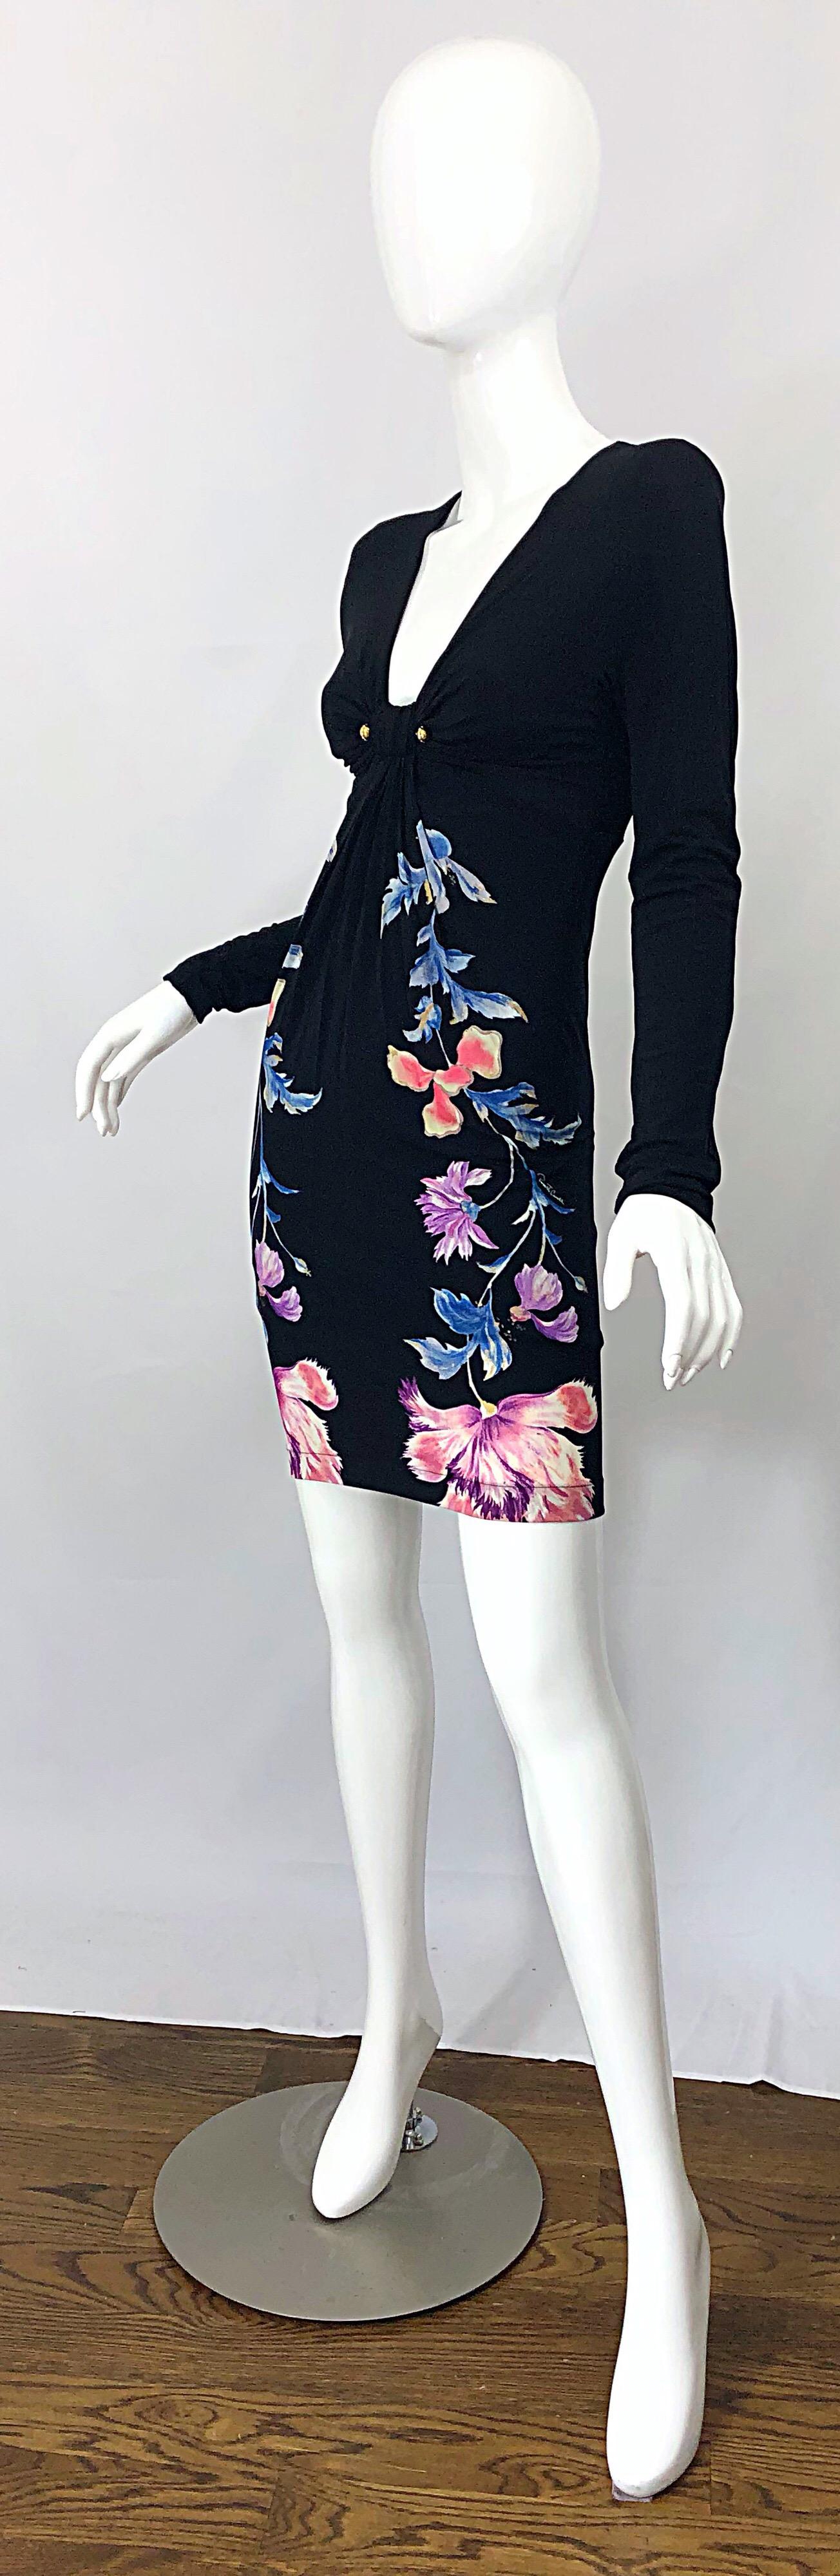 Roberto Cavalli Y2K Strong Shoulders Silk Jersey Rhinestone Long Sleeve Dress In Excellent Condition For Sale In San Diego, CA